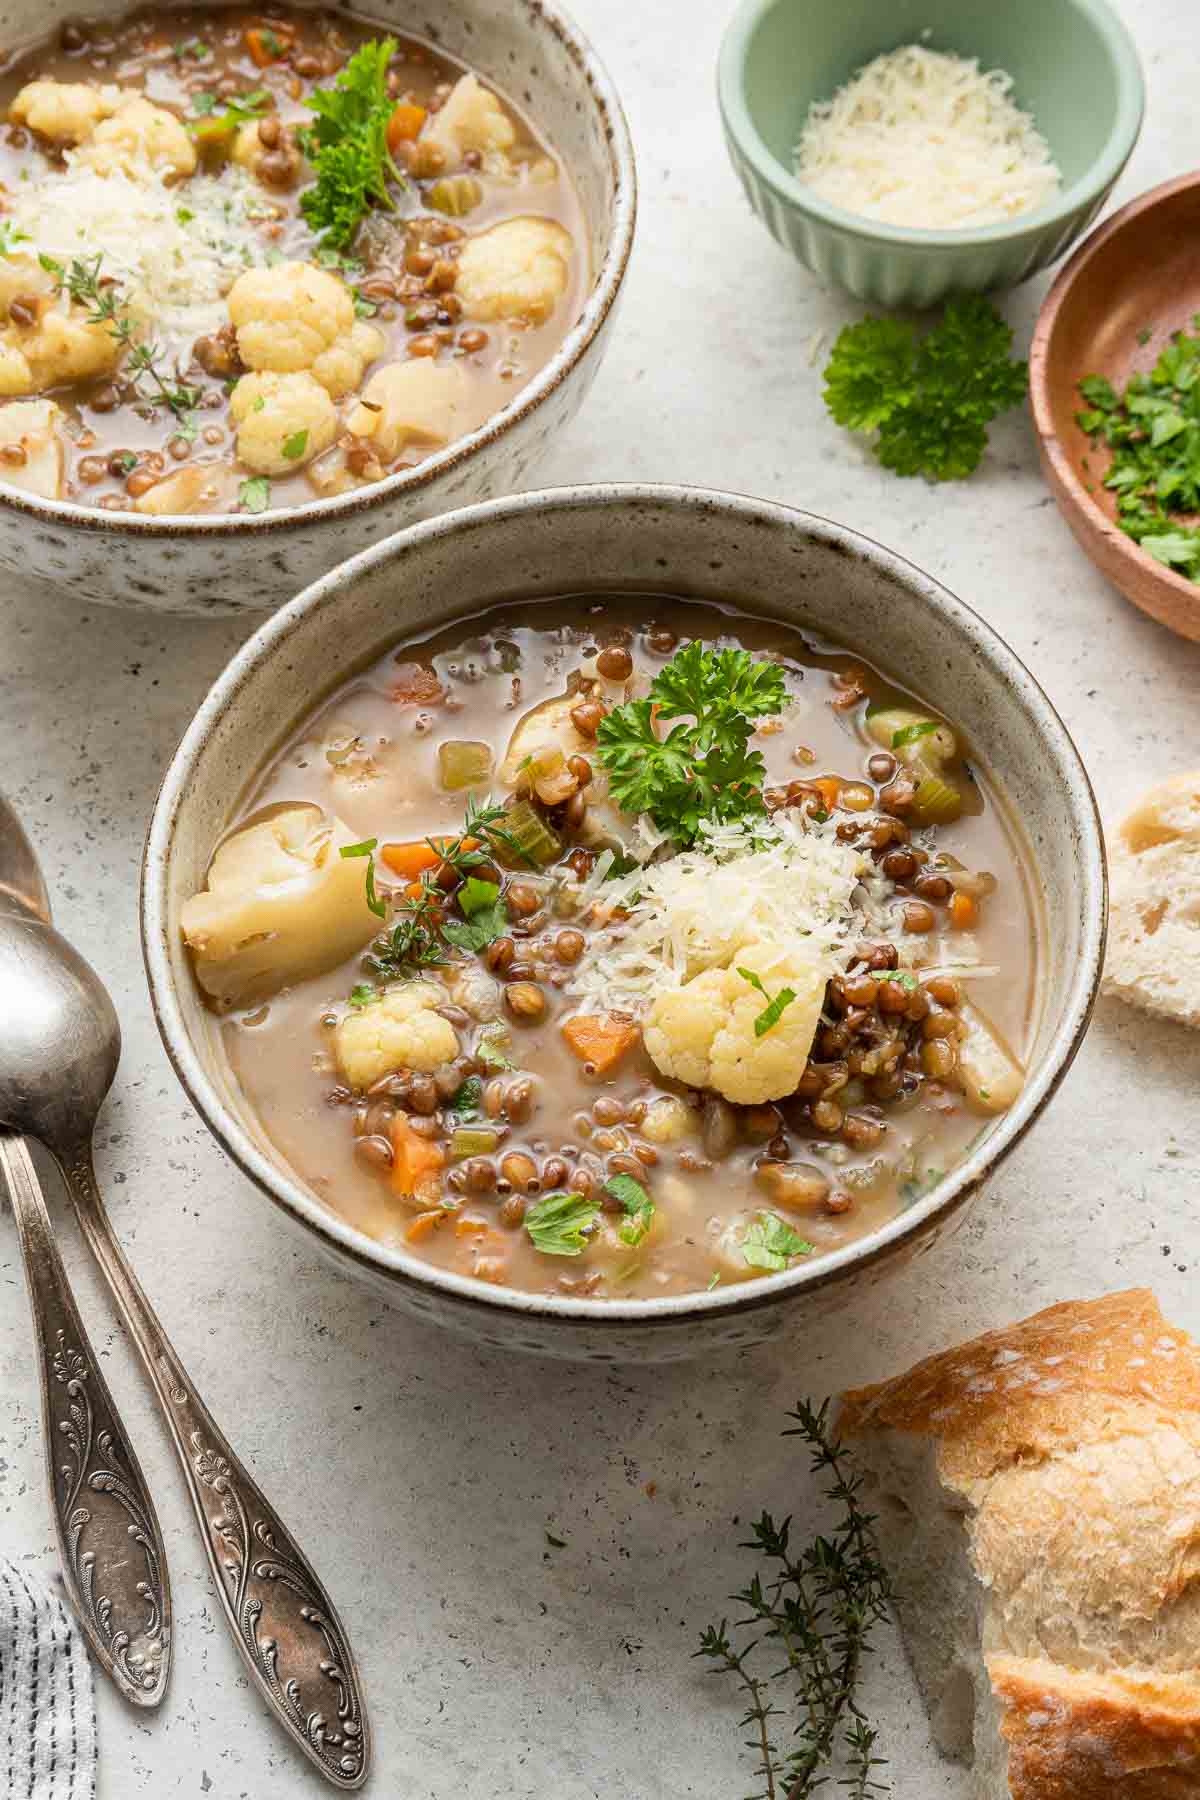 Side angle shot of a bowl of hearty soup on stone background with bread and spoons alongside.